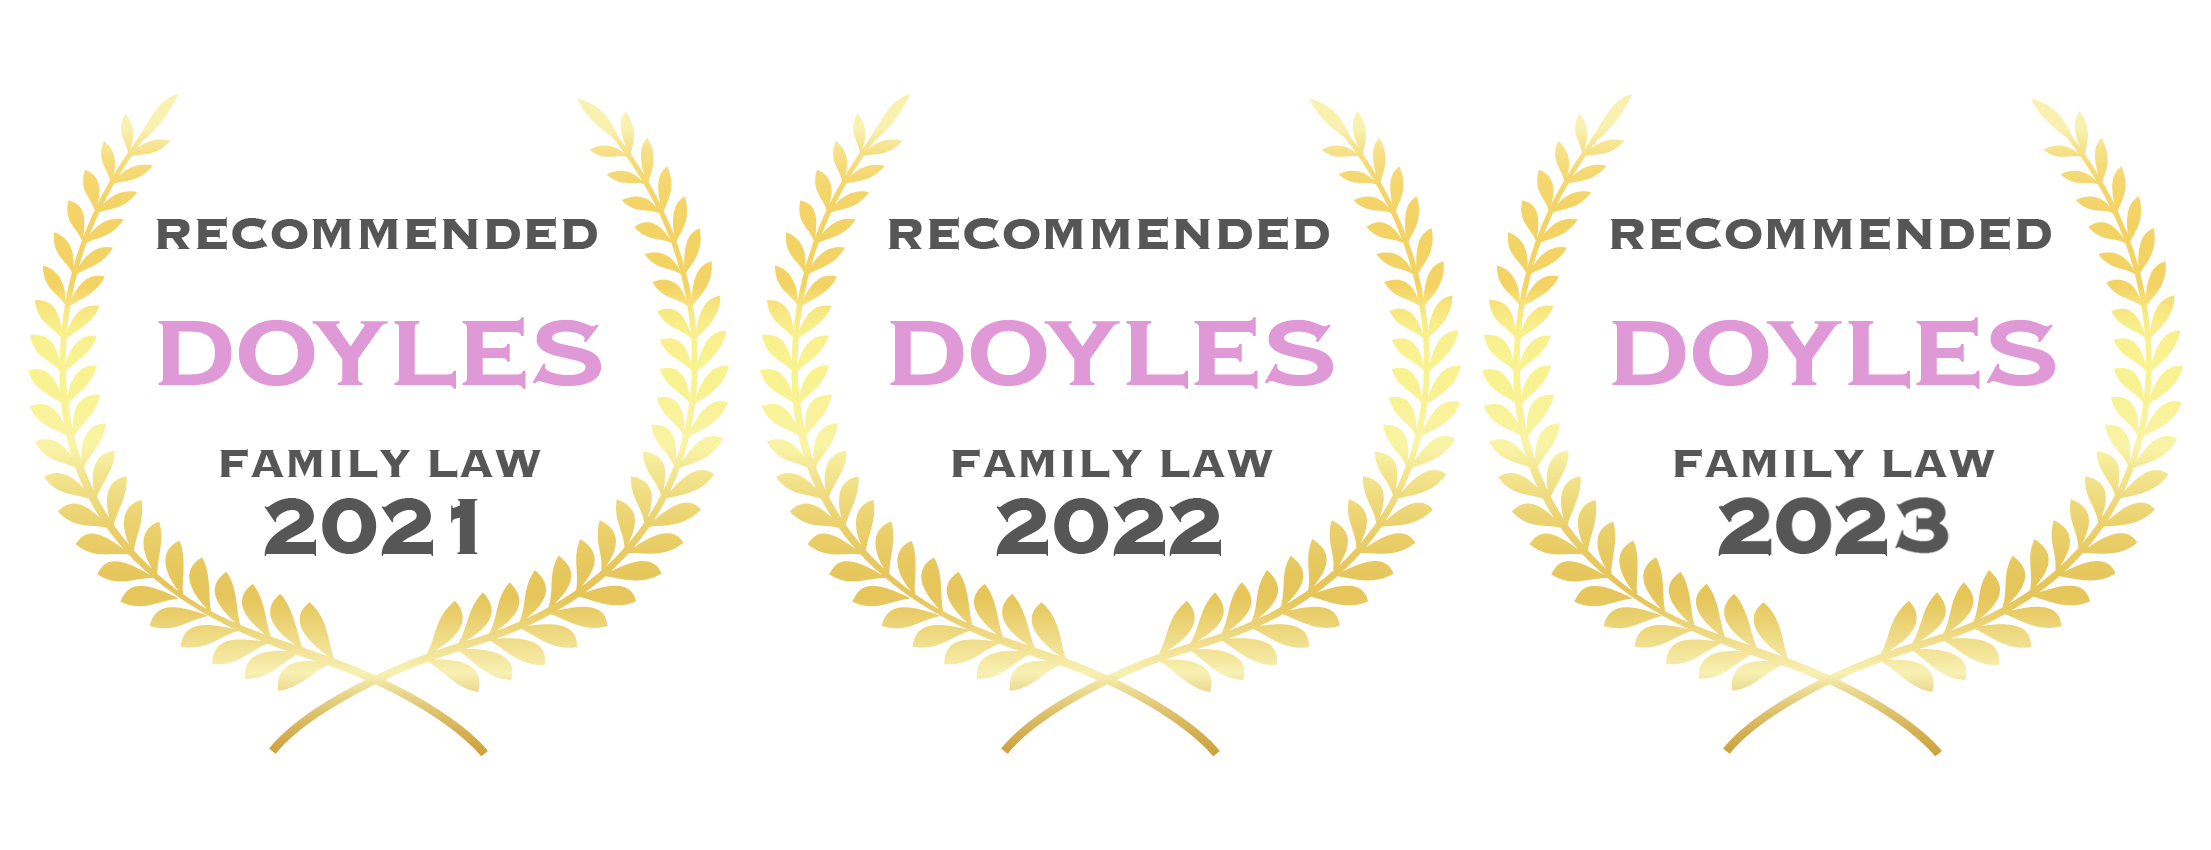 Family Law 2021 2023